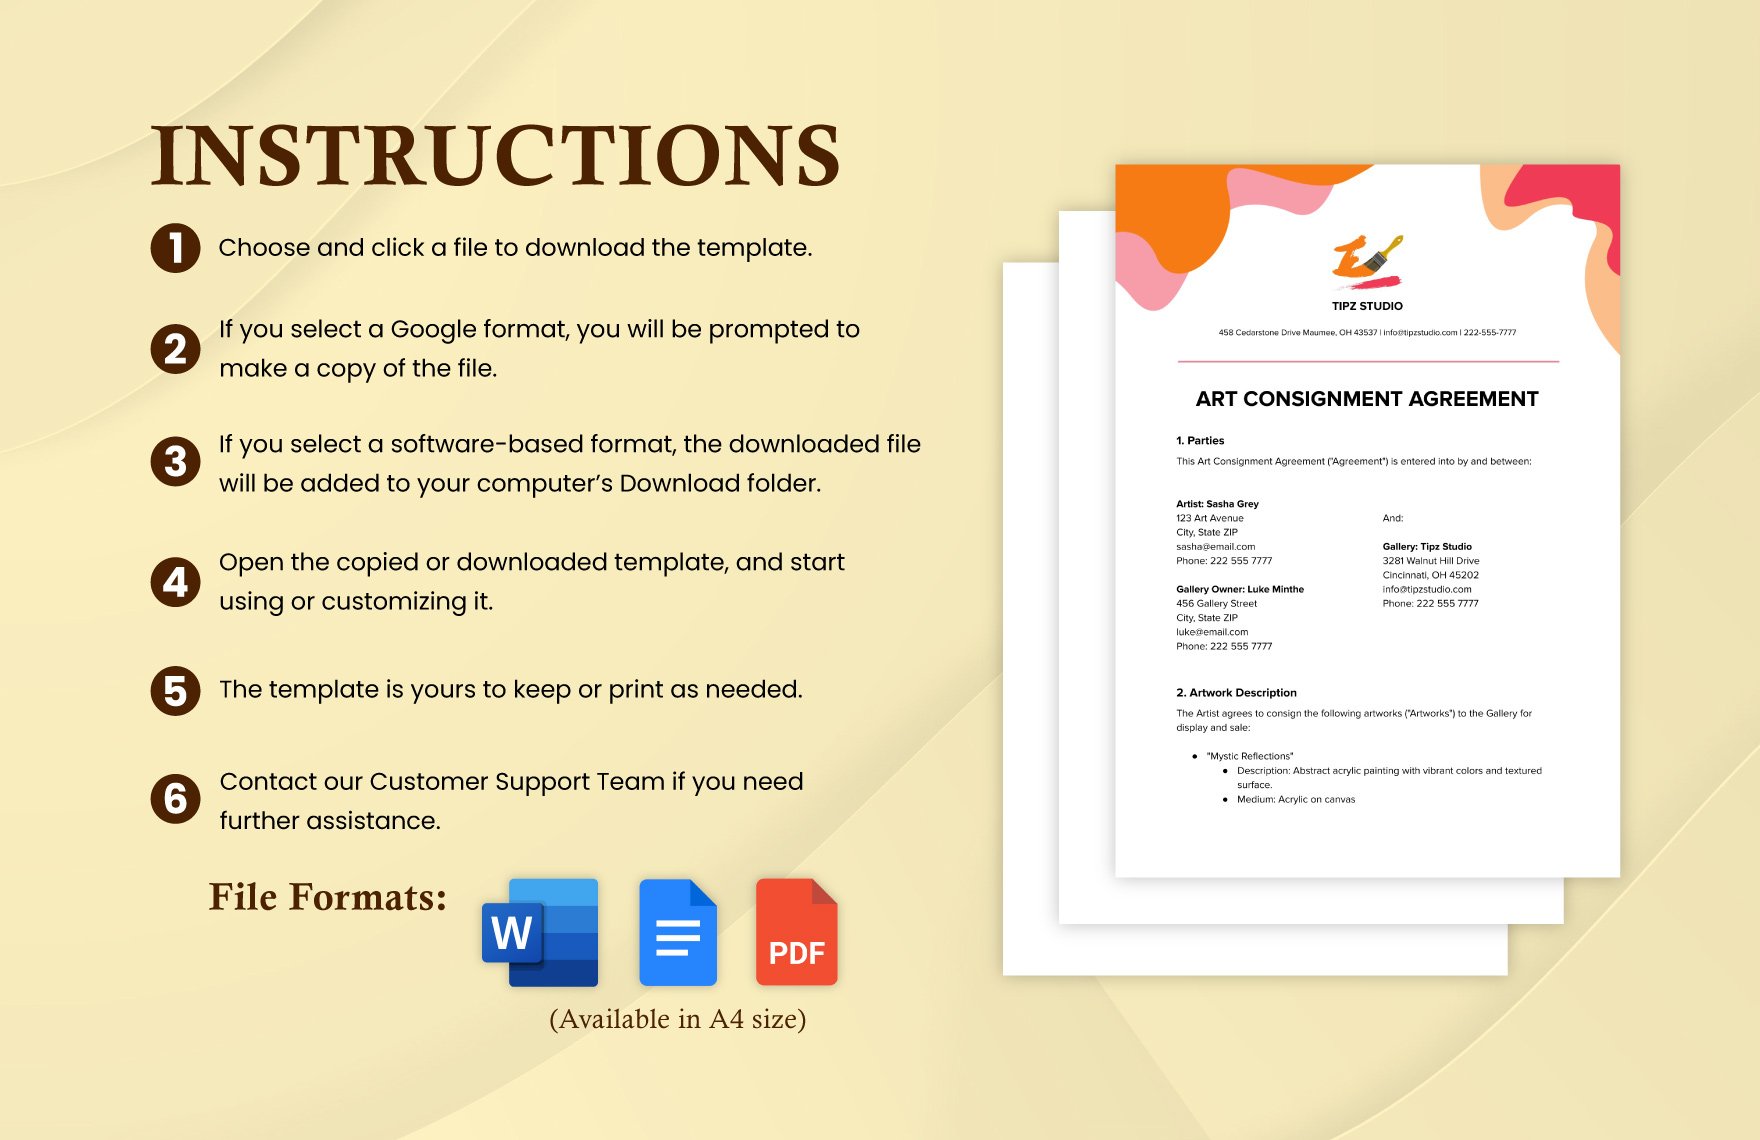 Art Consignment Agreement Template in Word PDF Google Docs Download